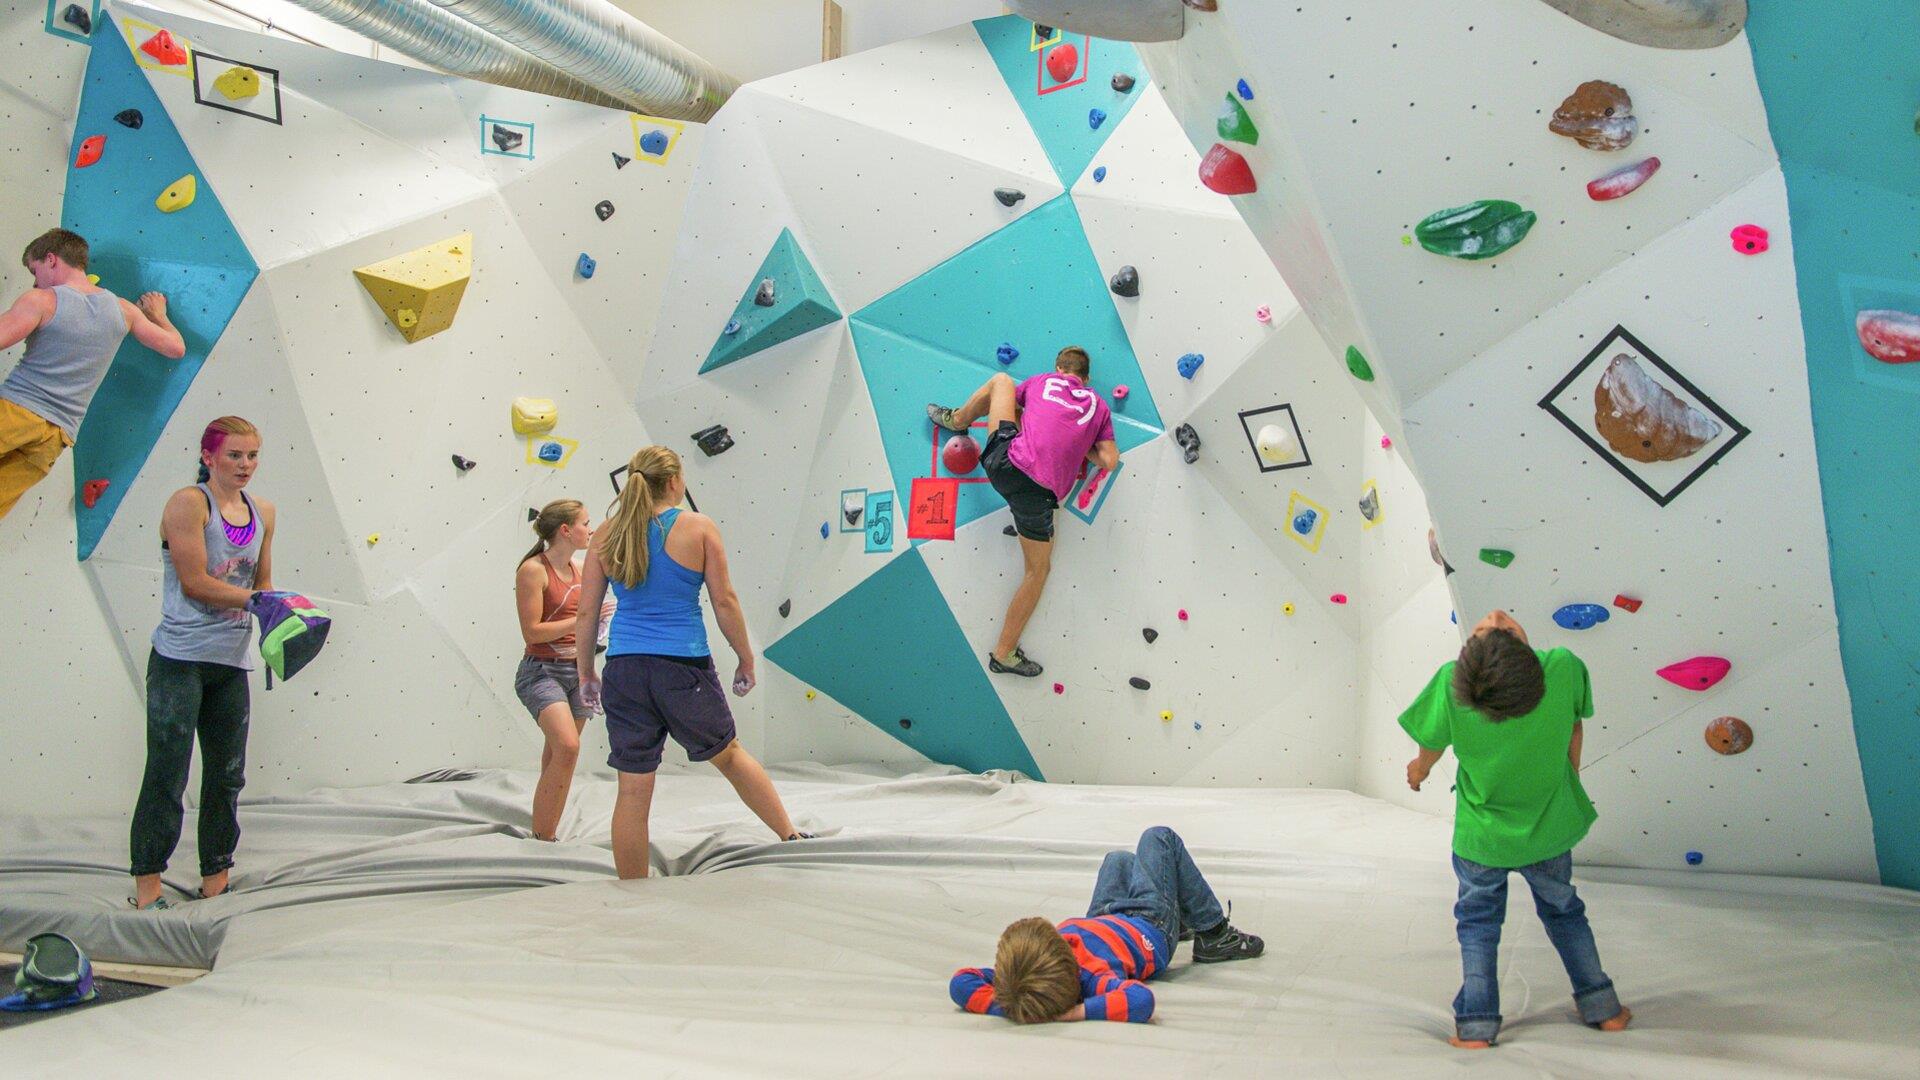 A modern climbing center with over 1,200 square meters of climbing surface.